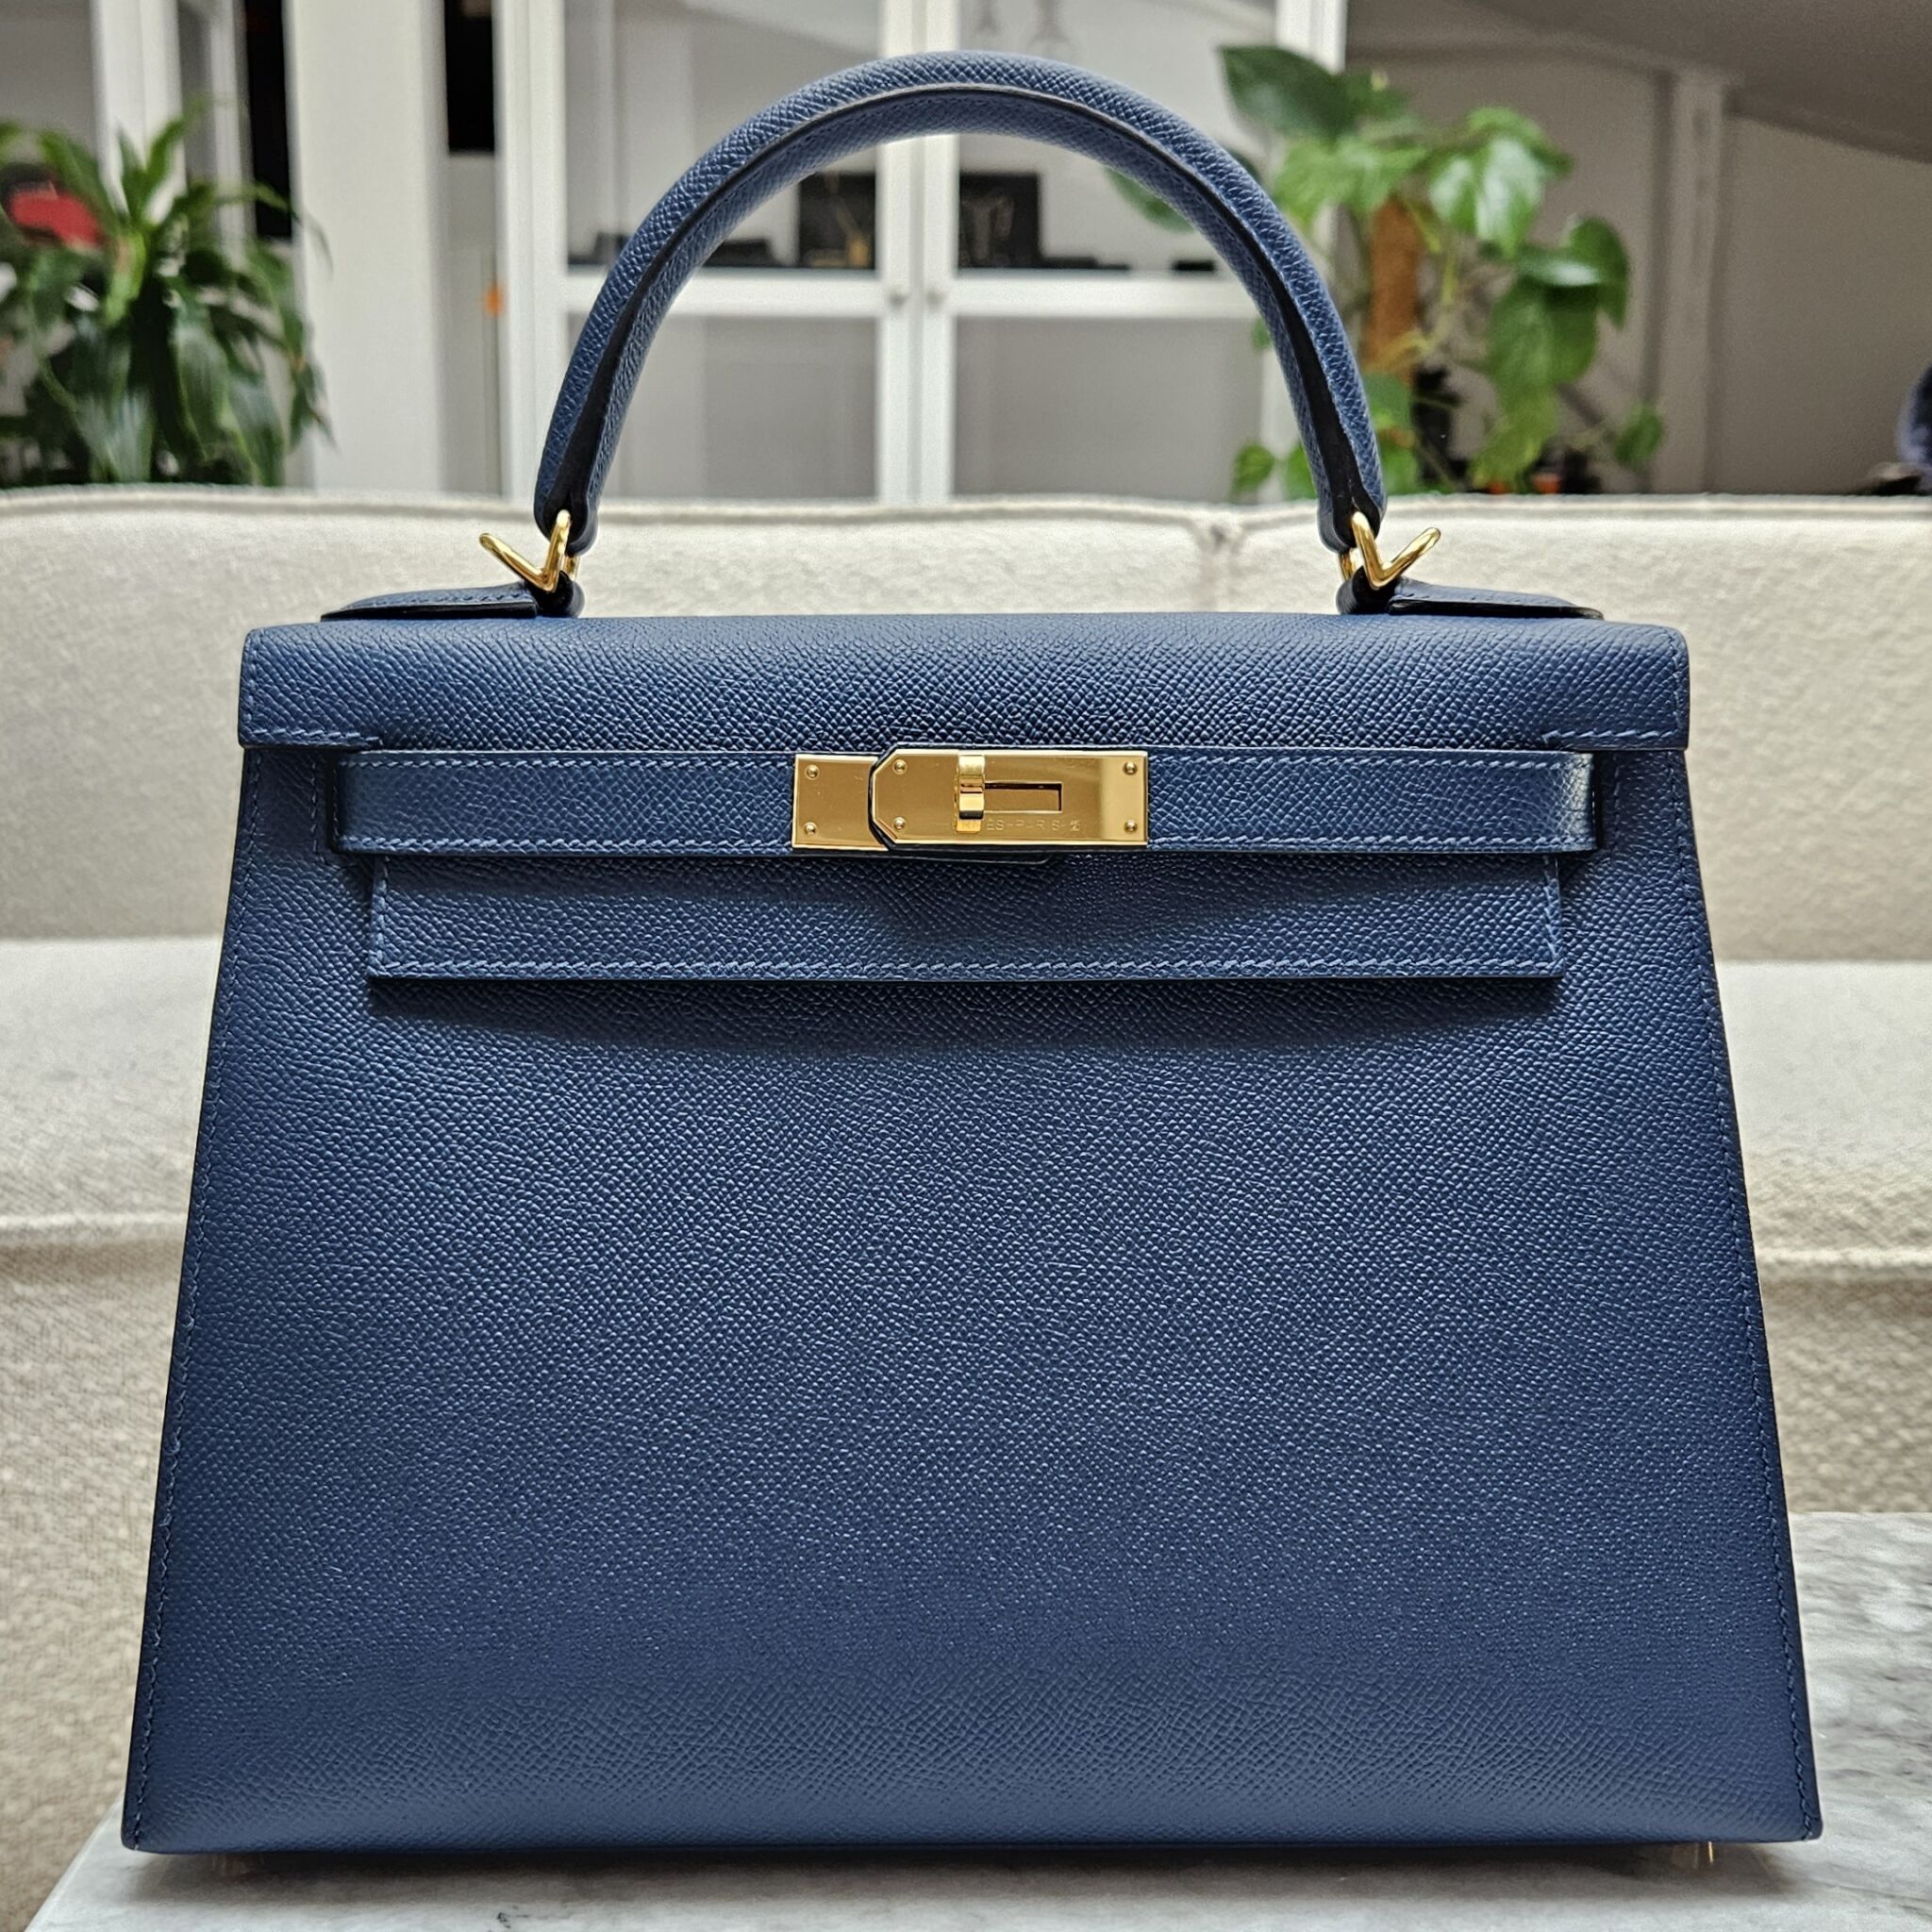 Hermes Kelly 28 Sellier, Royal Blue Epsom Leather with Gold